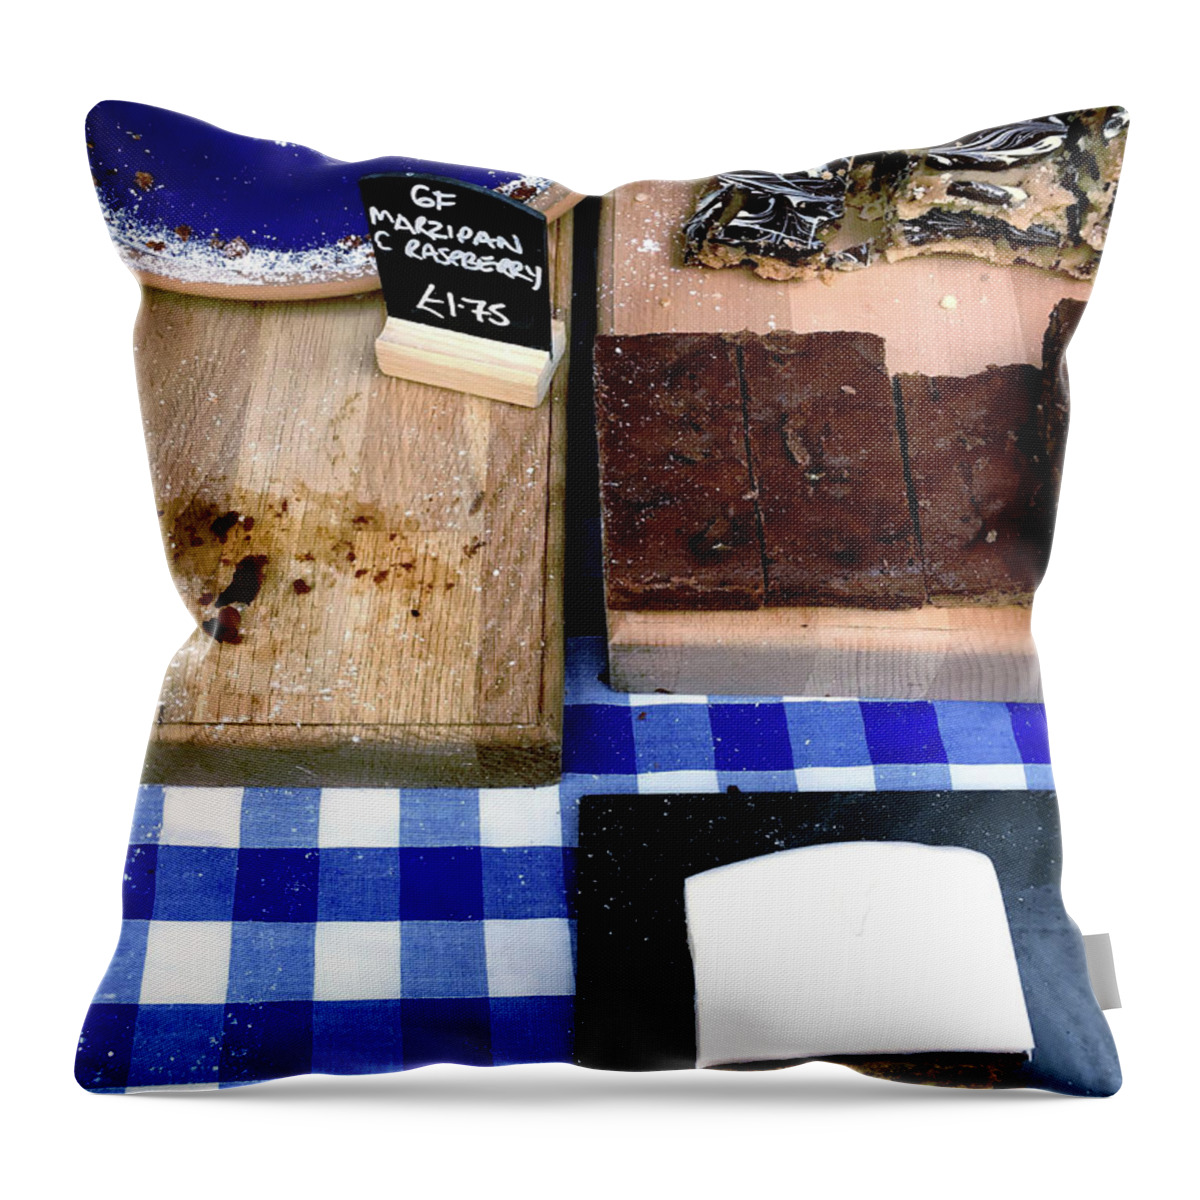 Advent Throw Pillow featuring the photograph Cake stall at a market #1 by Tom Gowanlock